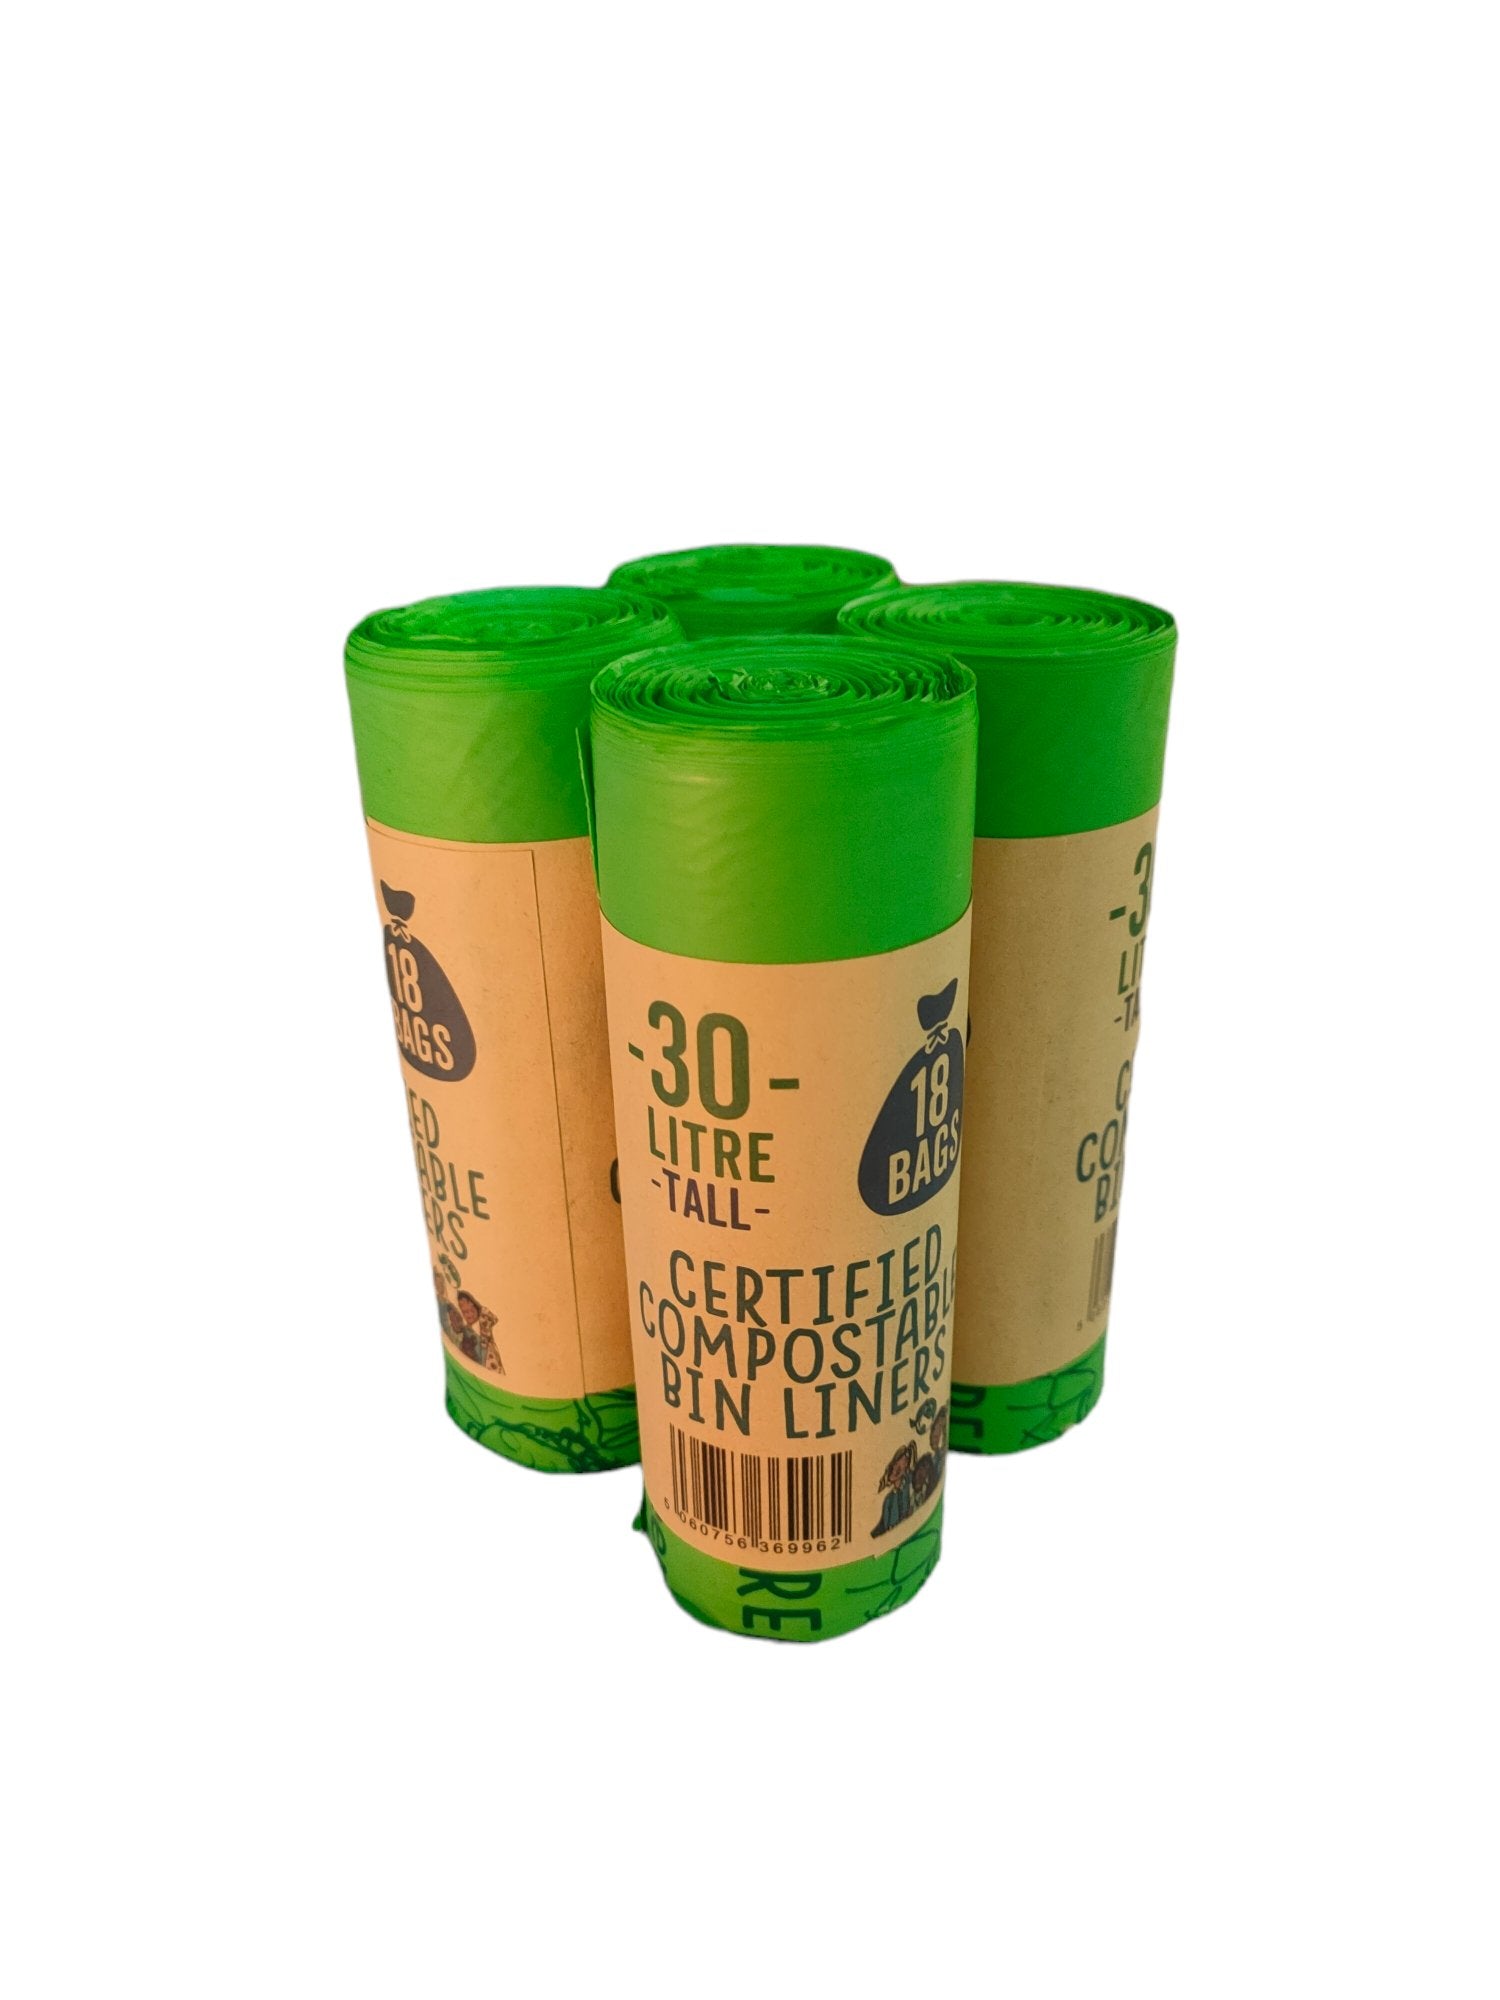 30 Litre Compostable Waste Bags | 4 Rolls of 18 Bags | Eco Green Living - EcoGreenLiving